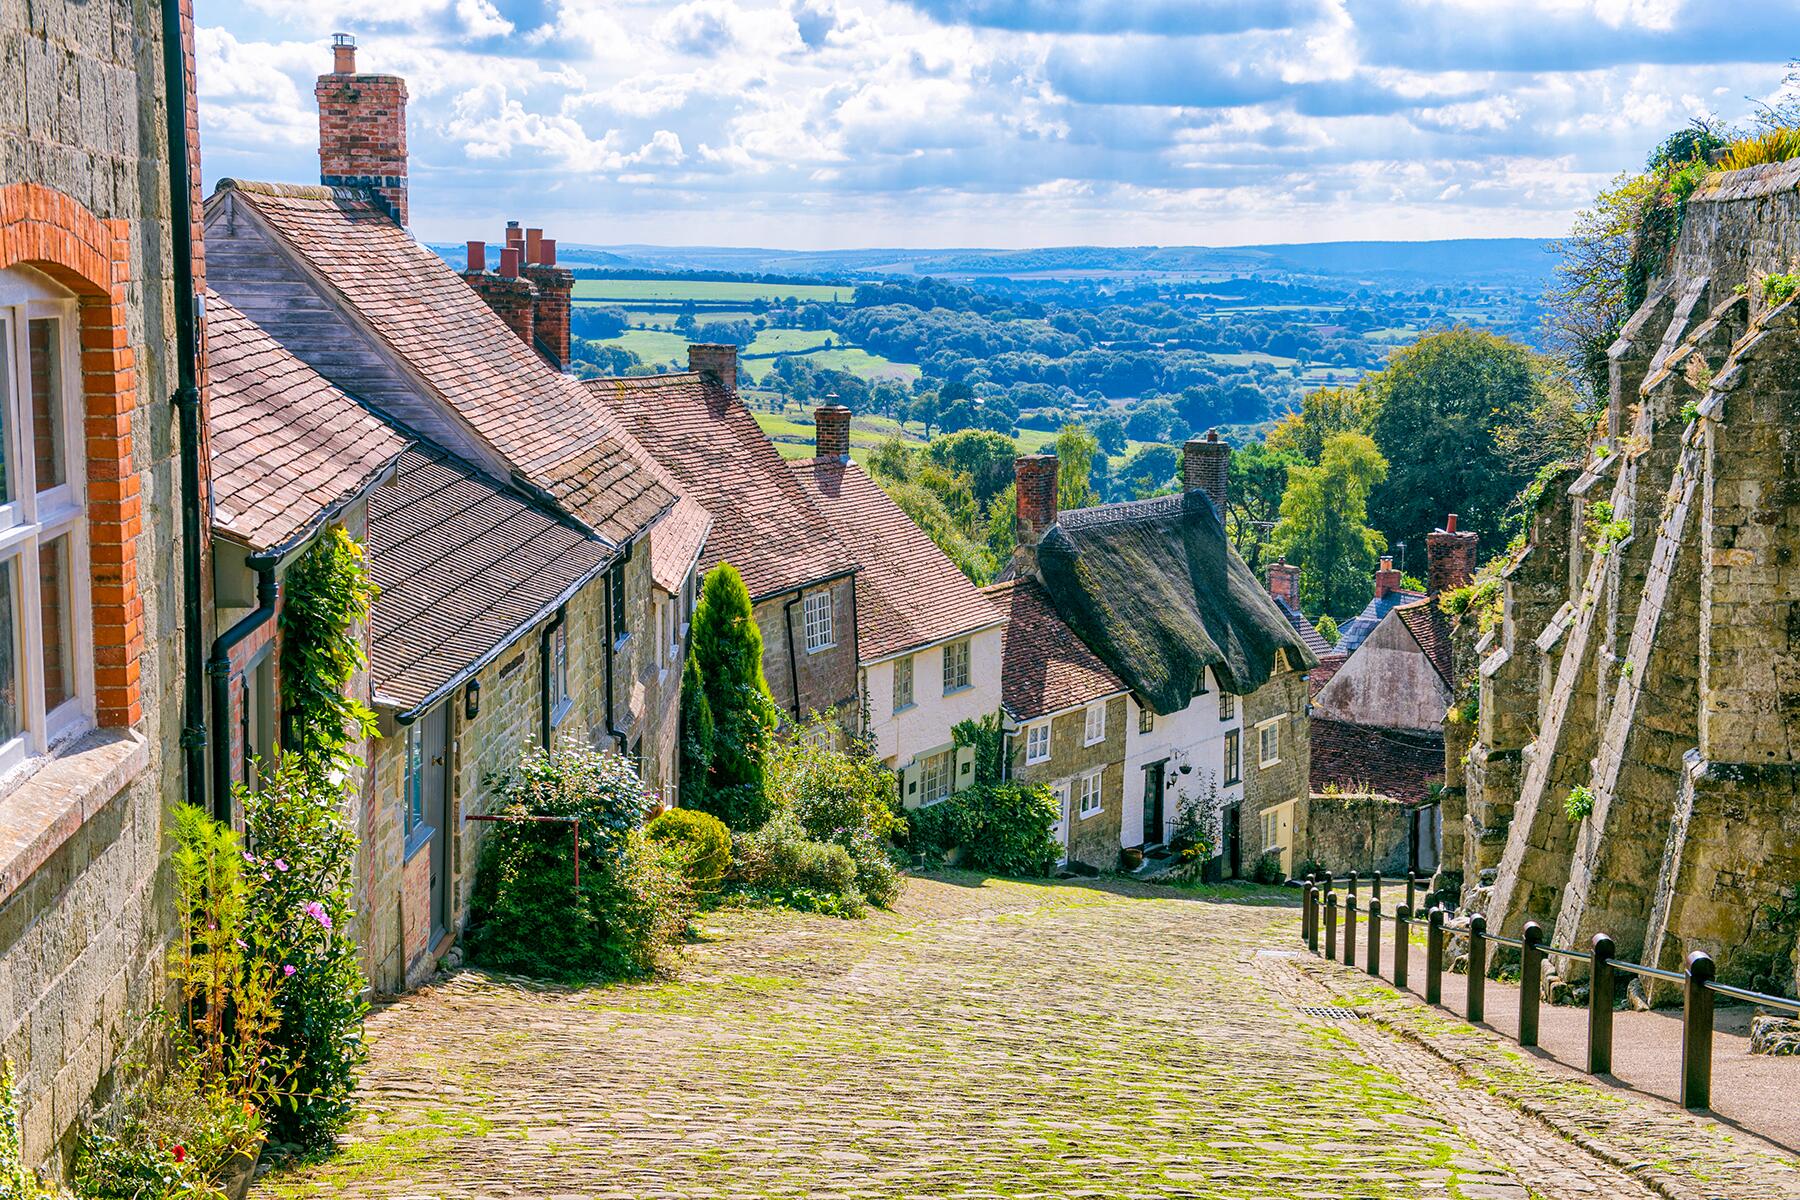 <a href='https://www.fodors.com/world/europe/england/experiences/news/photos/15-of-the-most-picturesque-small-towns-in-england#'>From &quot;The 21 Best Small Towns in England: Shaftesbury&quot;</a>